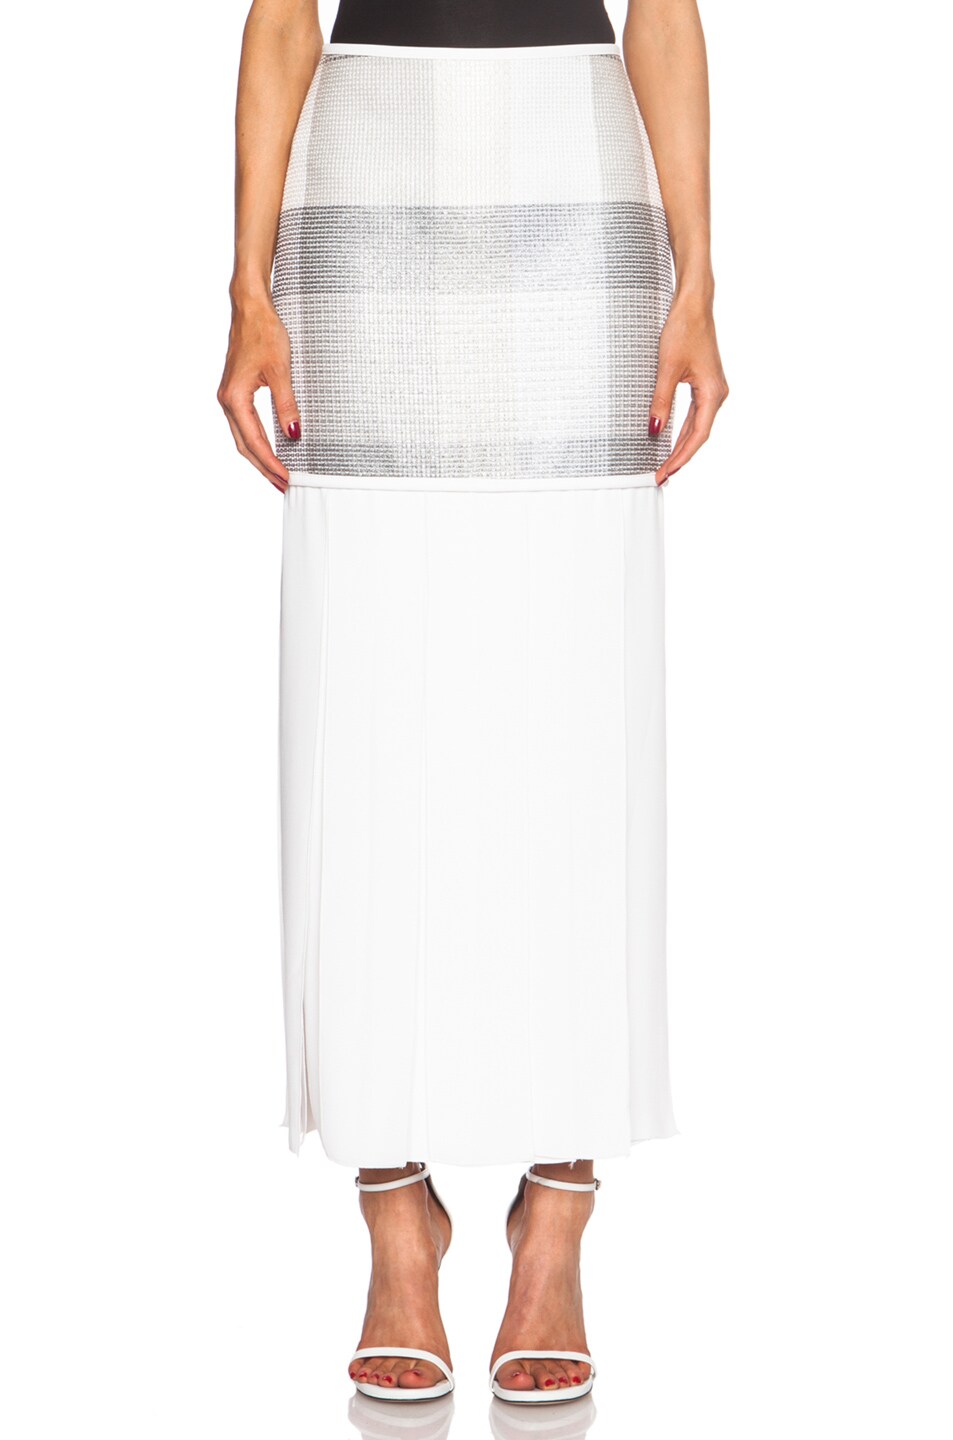 Image 1 of camilla and marc Monarch Cotton-Blend Skirt in Silver & White